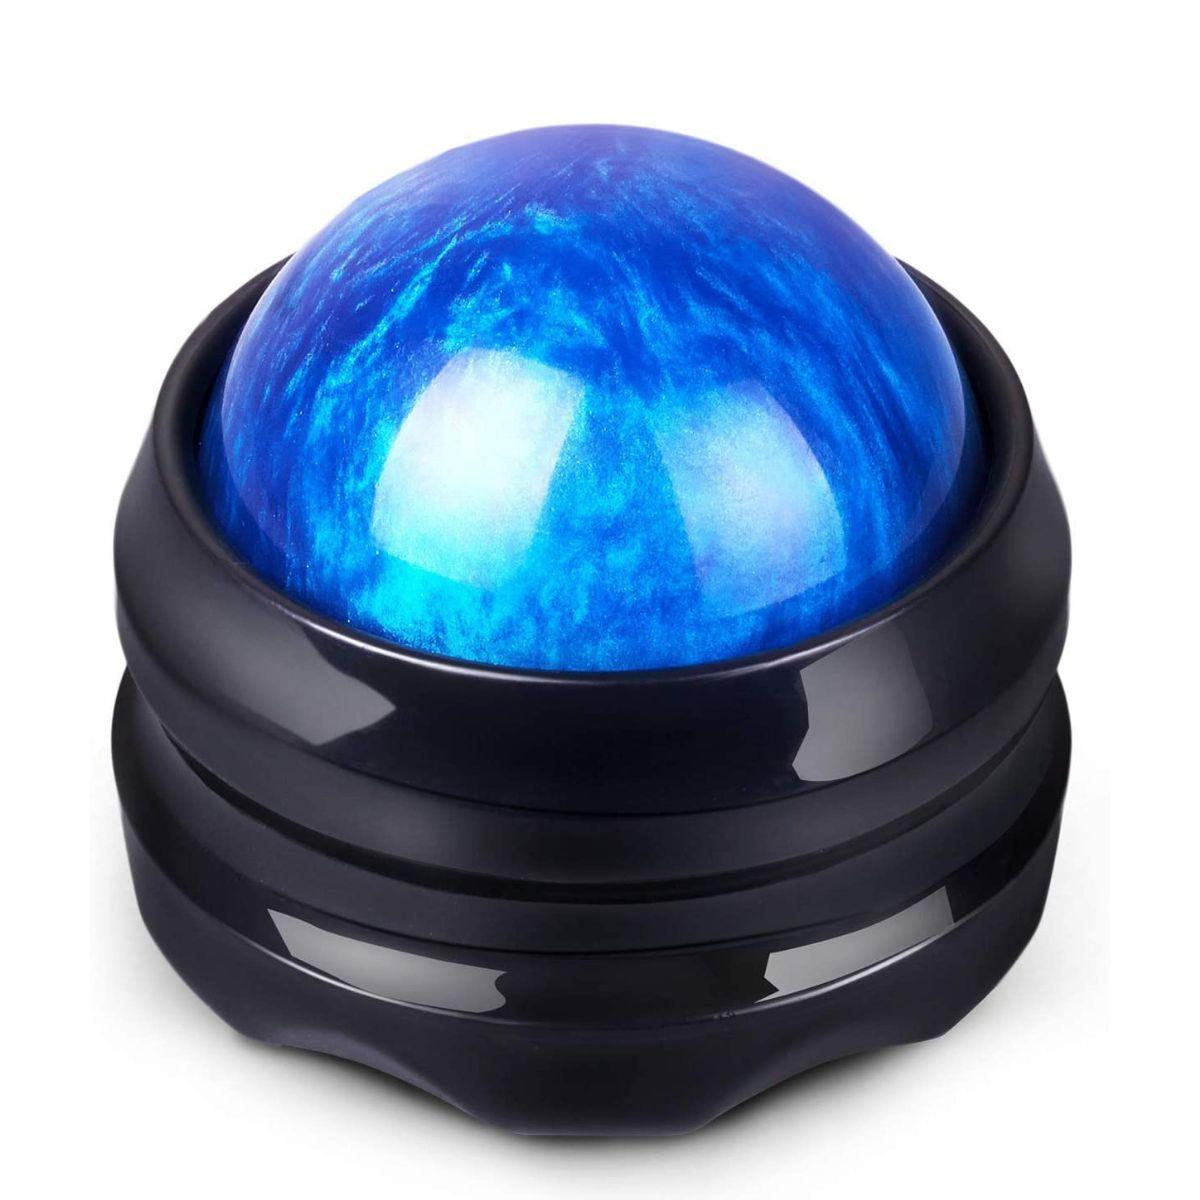 Magnetic Massaging Ball - tcistarhealthproducts